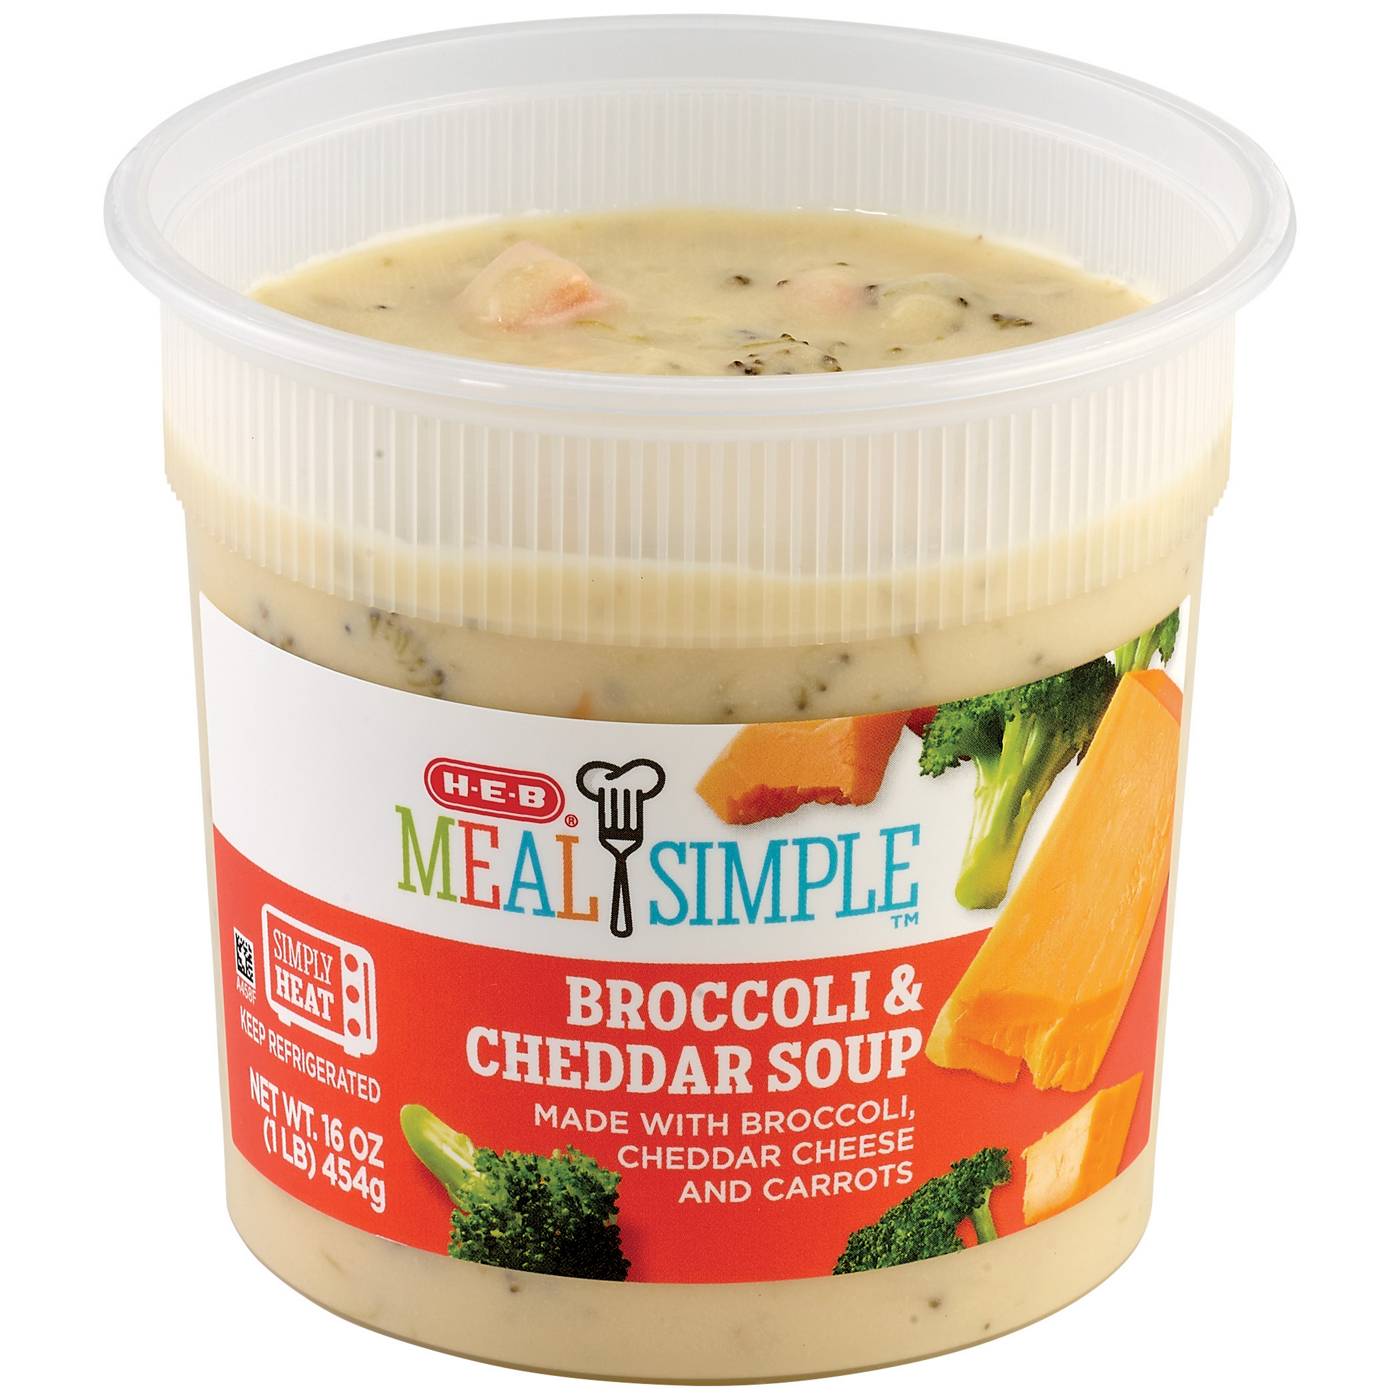 Meal Simple by H-E-B Broccoli Cheddar Soup; image 1 of 3